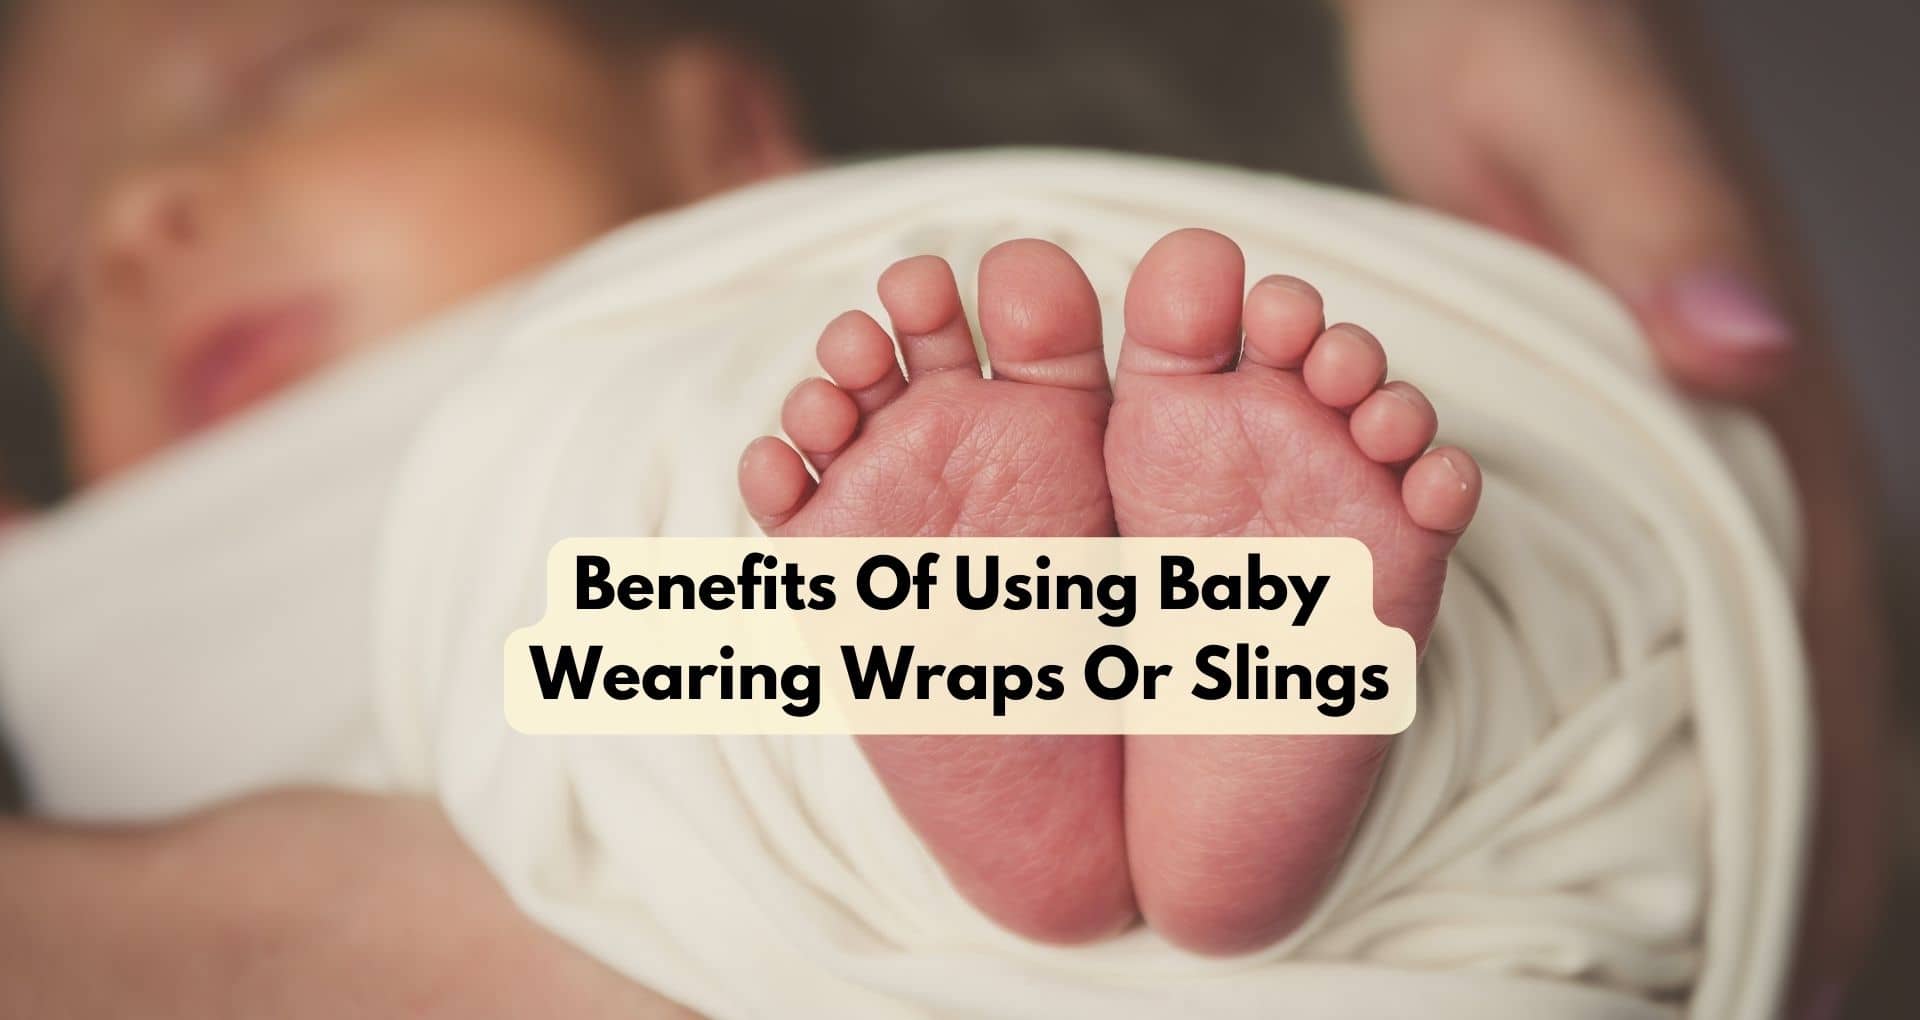 Benefits Of Using Baby Wearing Wraps Or Slings